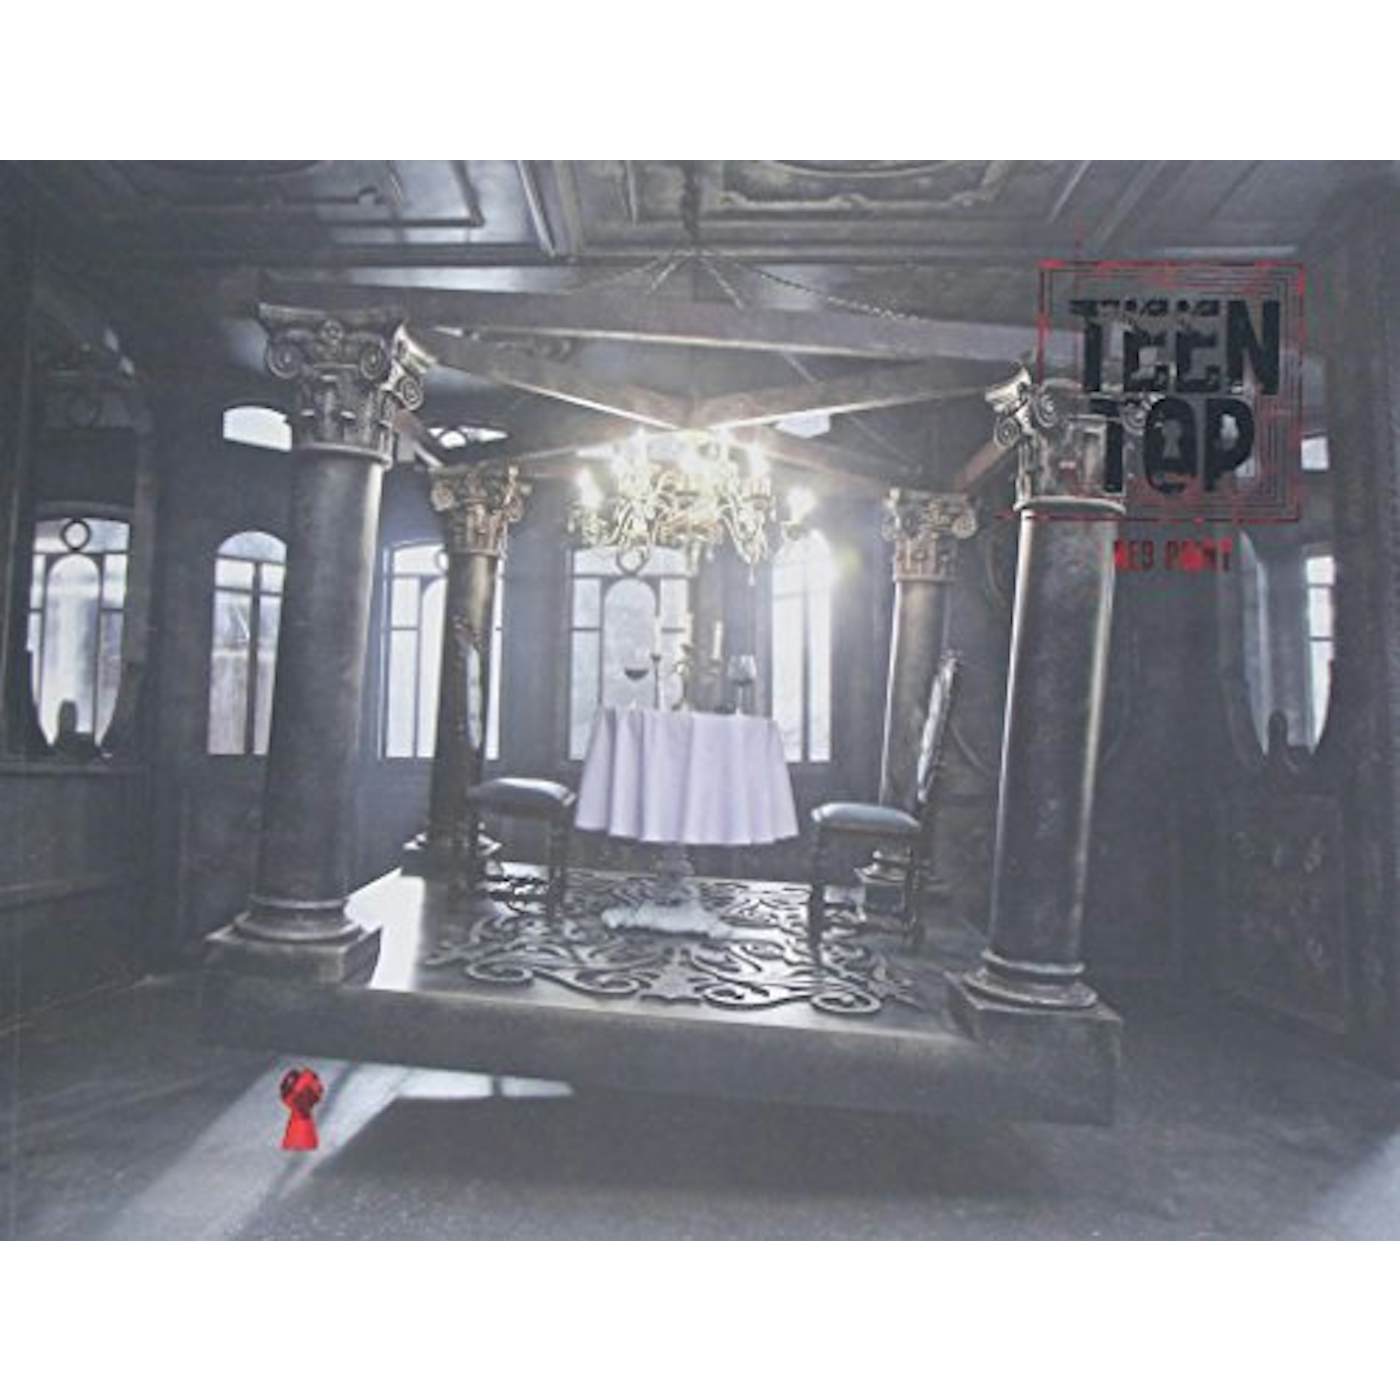 TEEN TOP RED POINT: URBAN VERSION CD